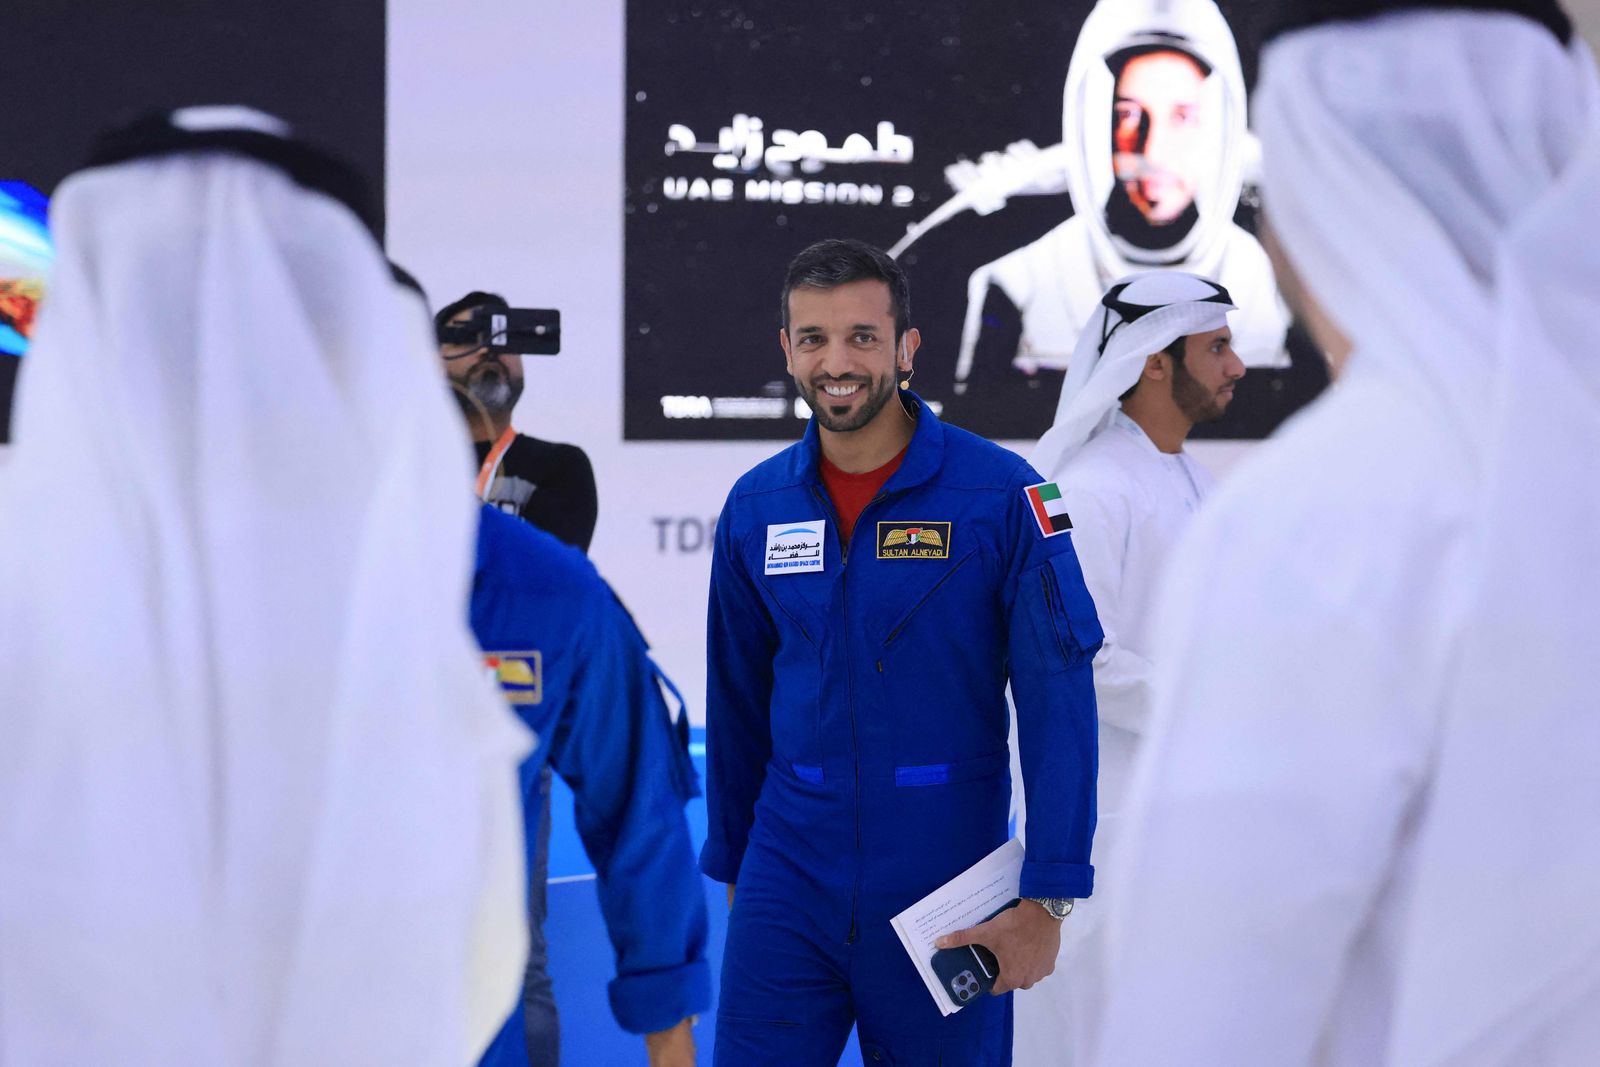 UAE astronaut Sultan AlNeyadi arrives to give a press conference at the Museum of the Future in the Gulf emirate of Dubai, on February 2, 2023. - AlNeyadi, 41, dubbed the 